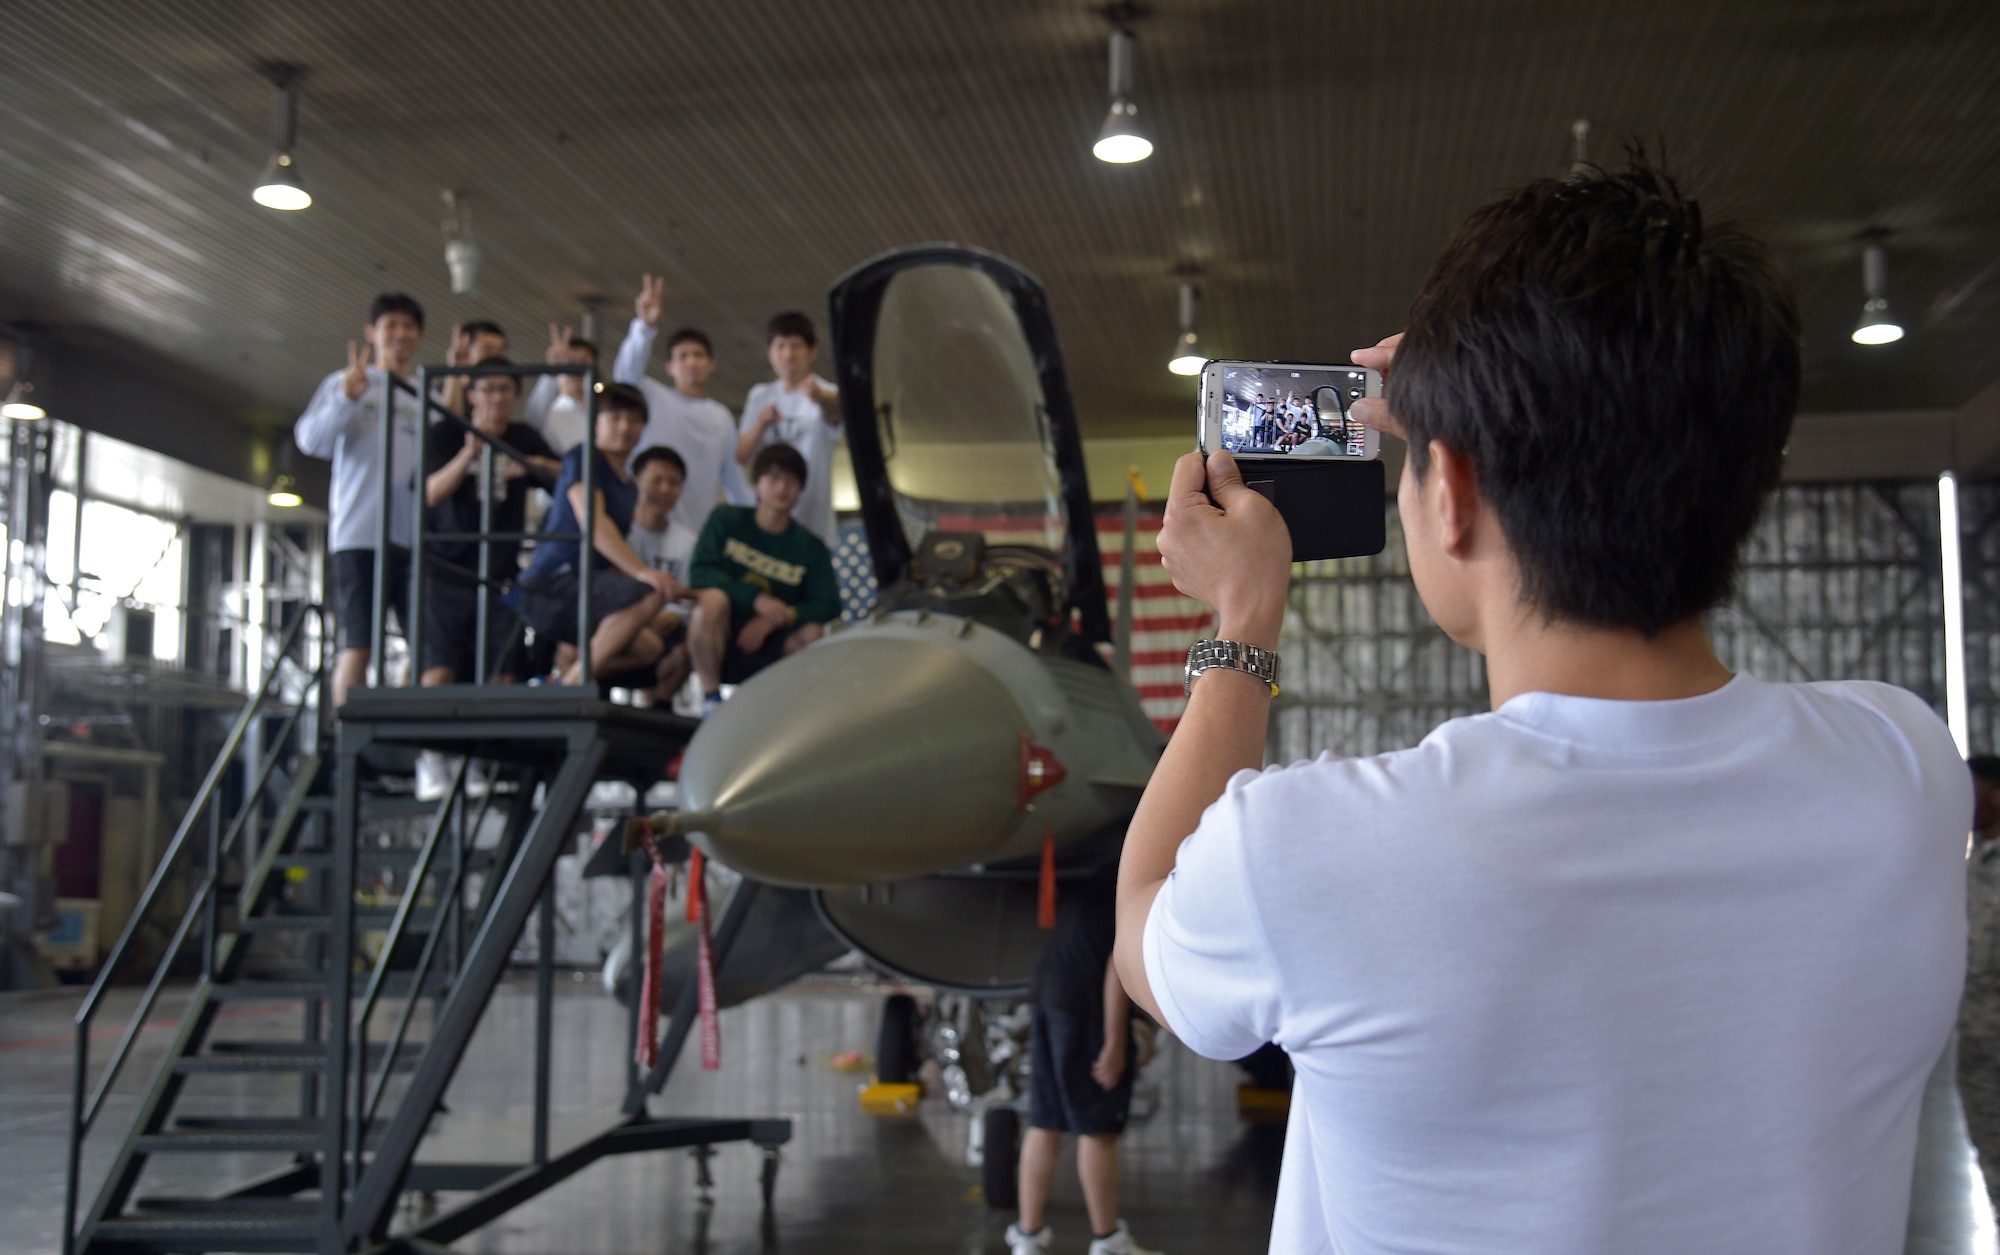 Members of the Japan Railway East Akita Peckers basketball team tour a static display of an F-16 Fighting Falcon at Misawa Air Base, Japan, June 17, 2016. The team was briefed on the 35th Fighter Wing mission and viewed F-16s before taking part in a basketball camp and game. (U.S. Air Force photo by Senior Airman Deana Heitzman)